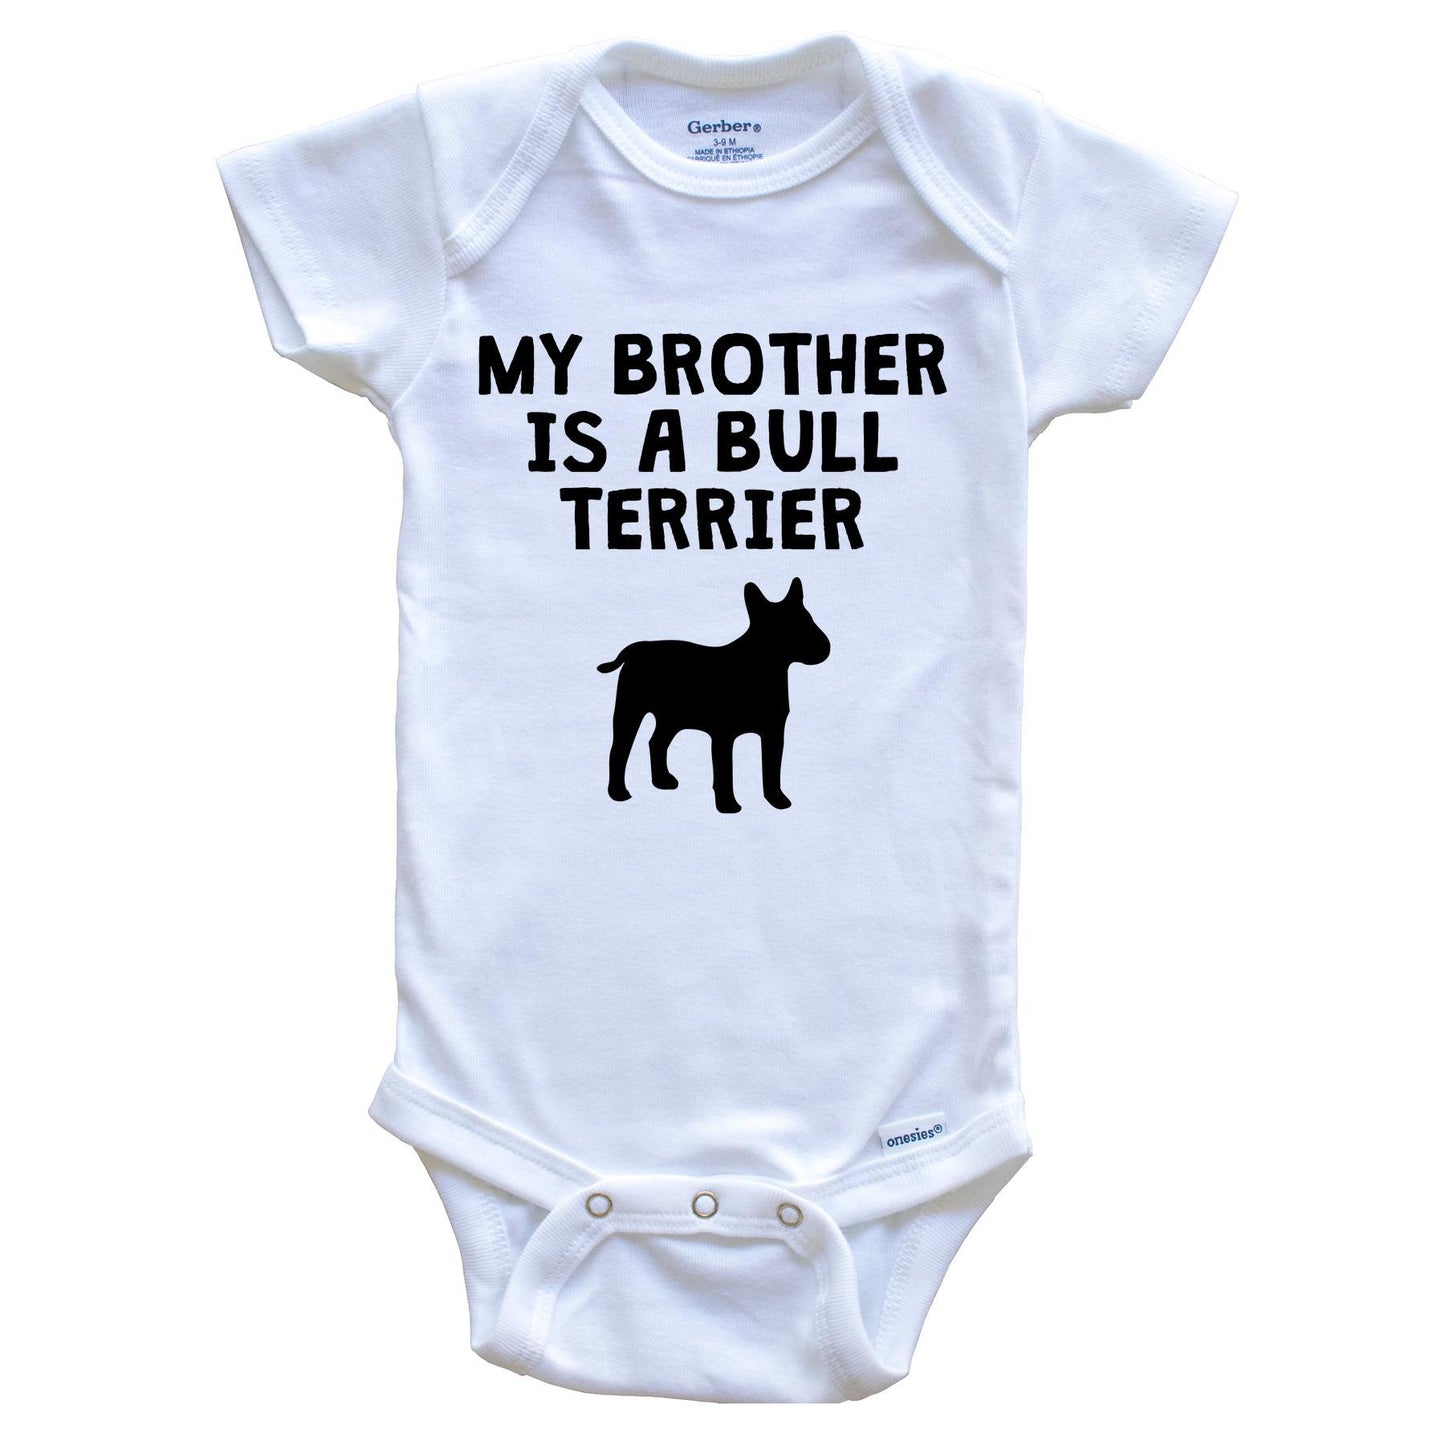 My Brother Is A Bull Terrier Baby Onesie